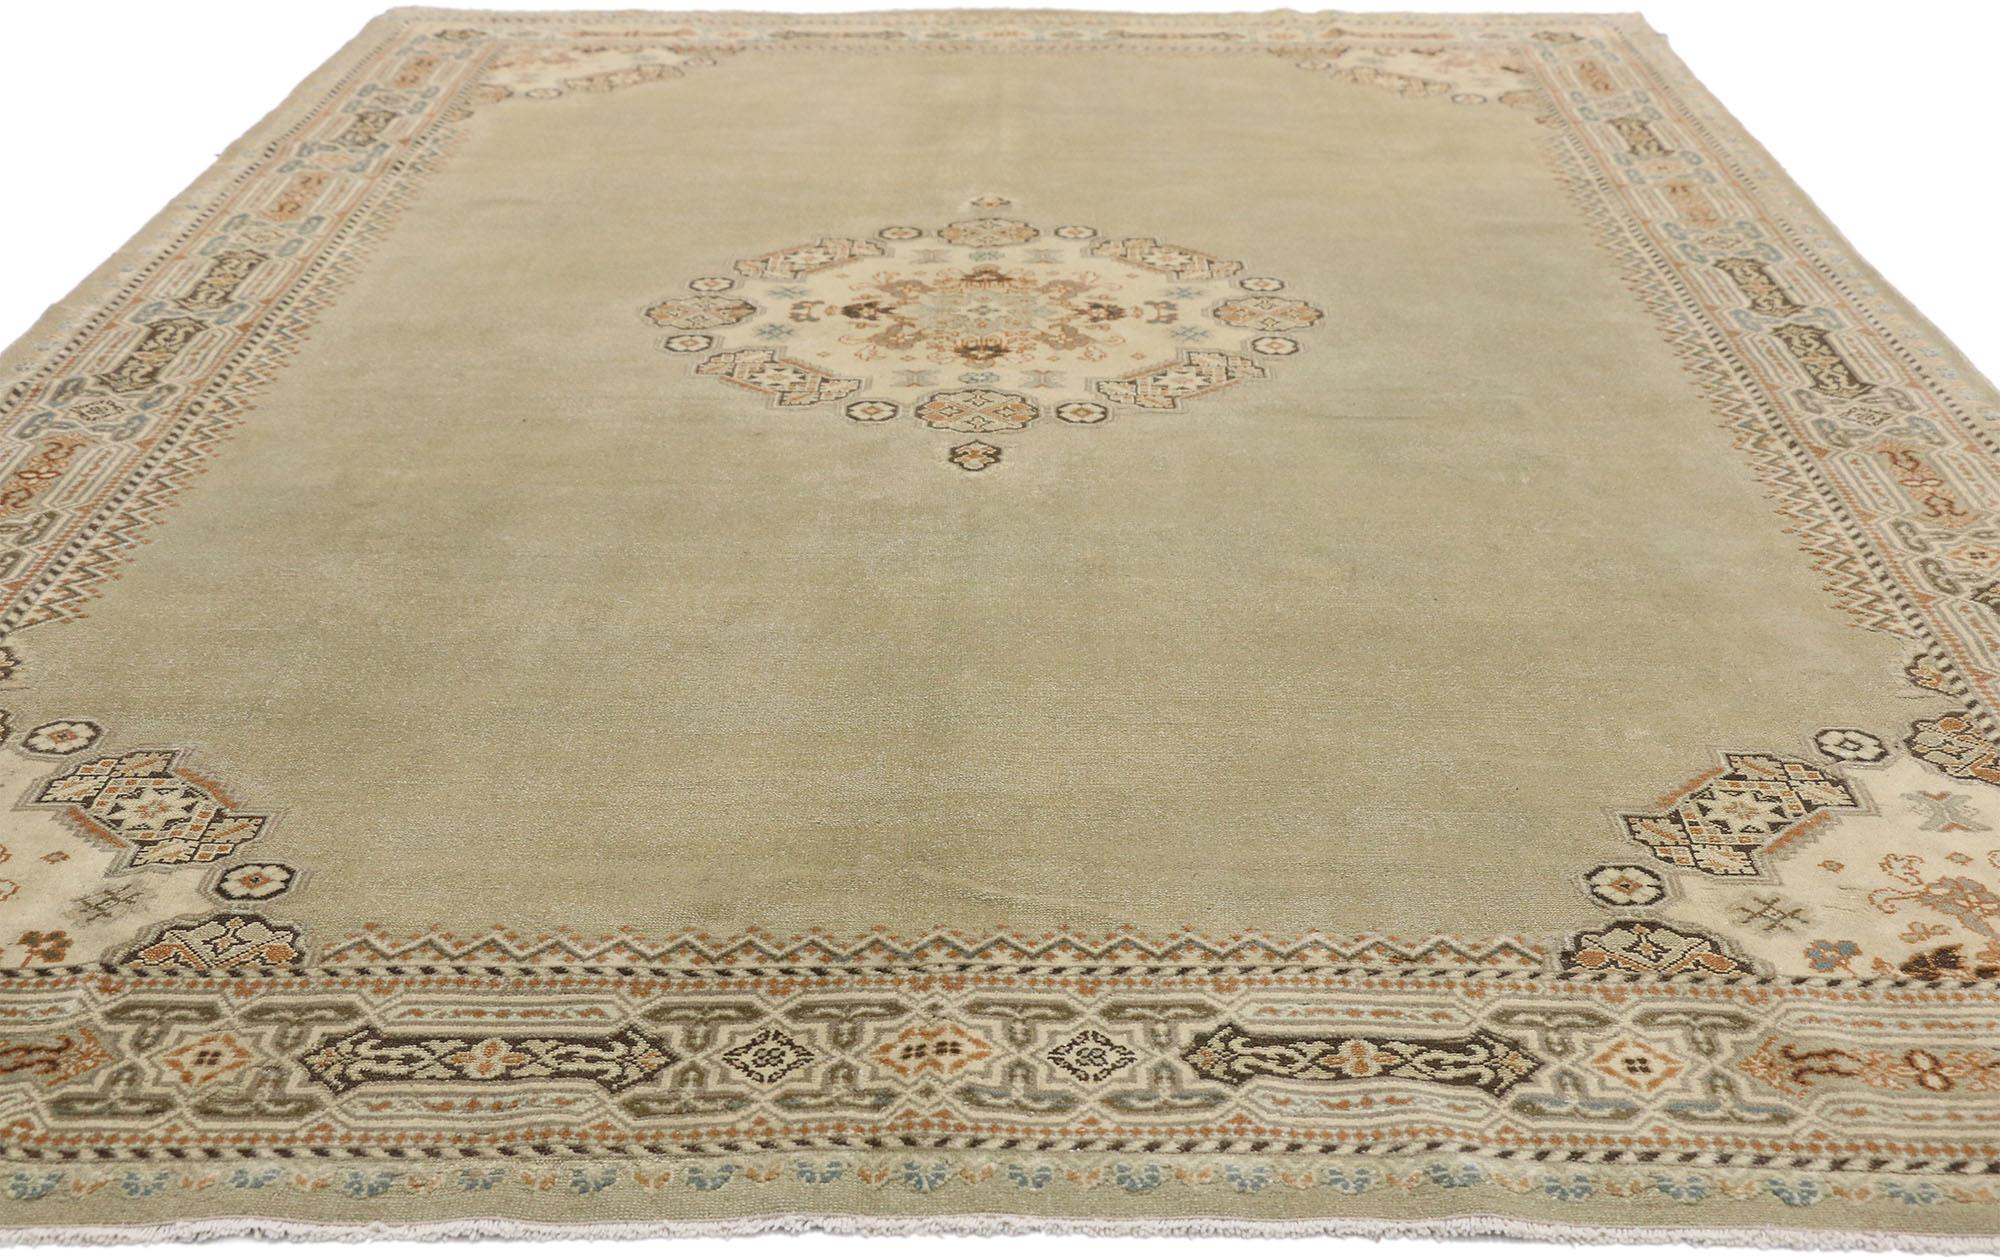 52495 Distressed Antique Persian Malayer Rug with Eclectic Parisian and Arts & Crafts Style. This hand knotted wool distressed antique Persian Malayer rug showcases an eclectic Parisian and Arts & Crafts style. A round medallion composed of a small